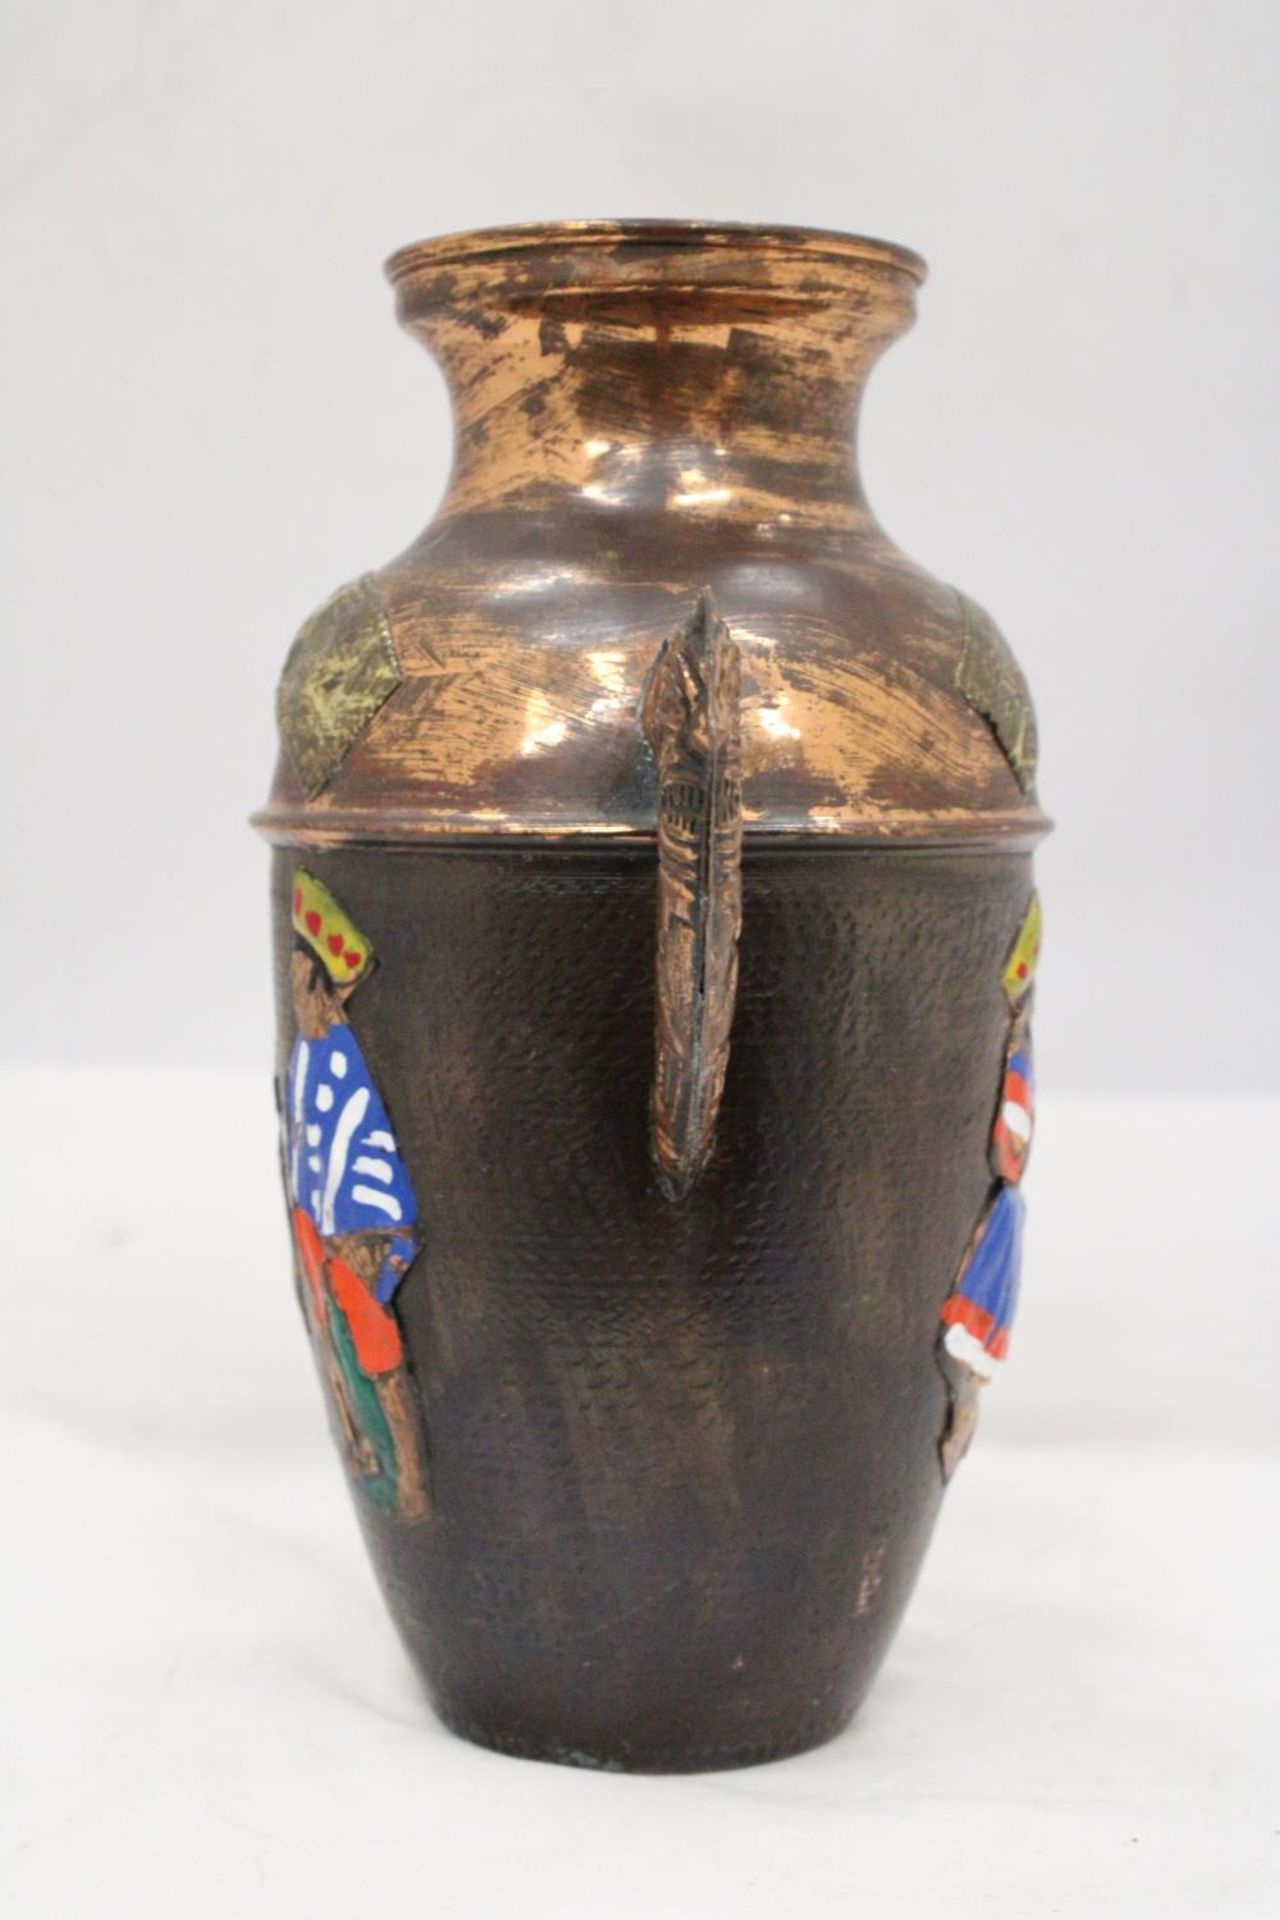 A VINTAGE COLOMBIAN MAYAN DECORATED COPPER VASE - Image 2 of 5